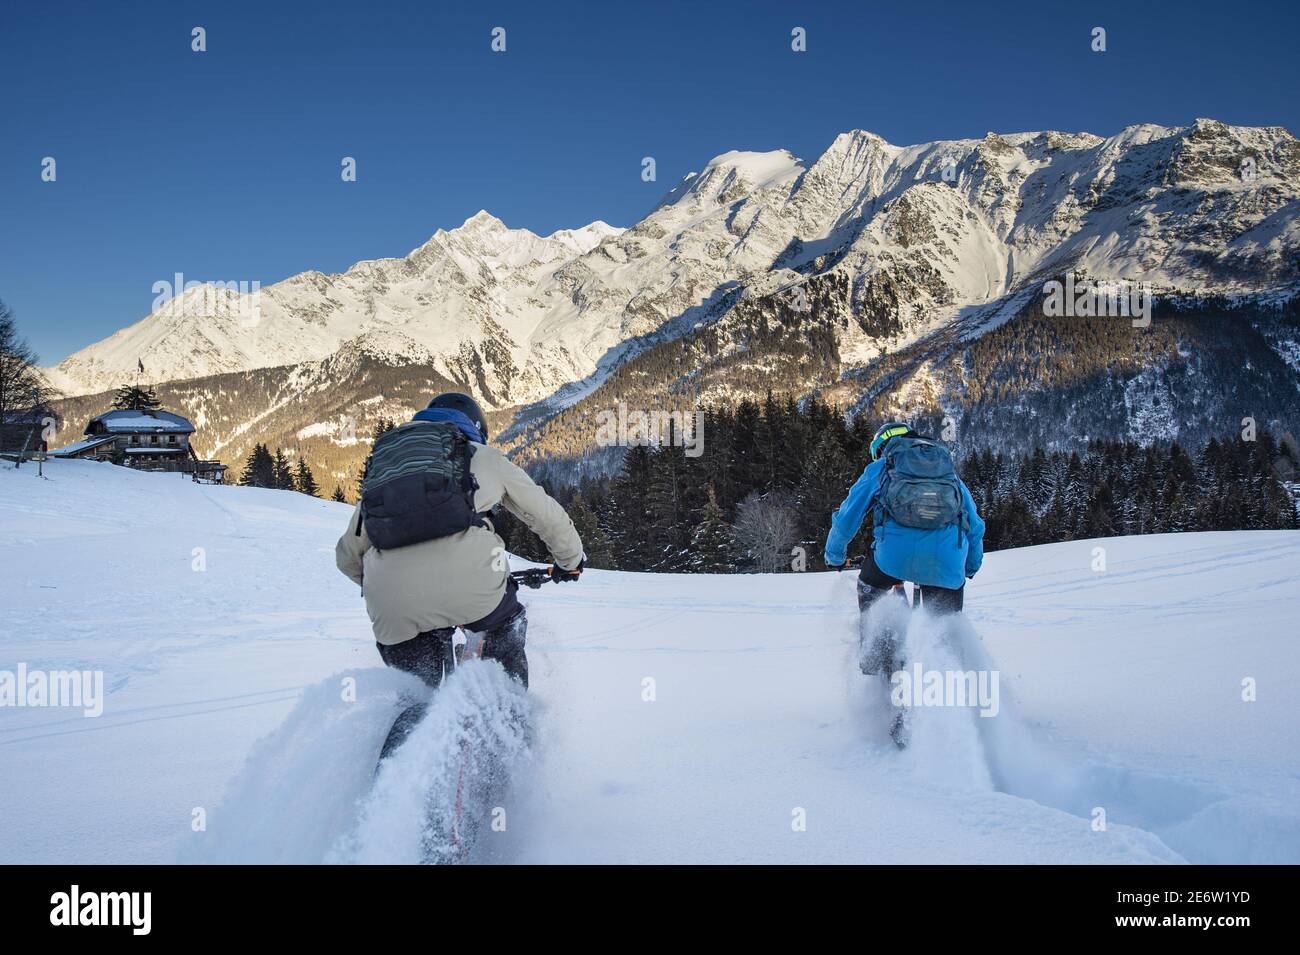 France, Haute Savoie, Mont Blanc massif, Les Contamines Montjoie, electric Fatbike on snow on the Colombaz chalets itinerary, very playful pedaling in the powder snow. Stock Photo